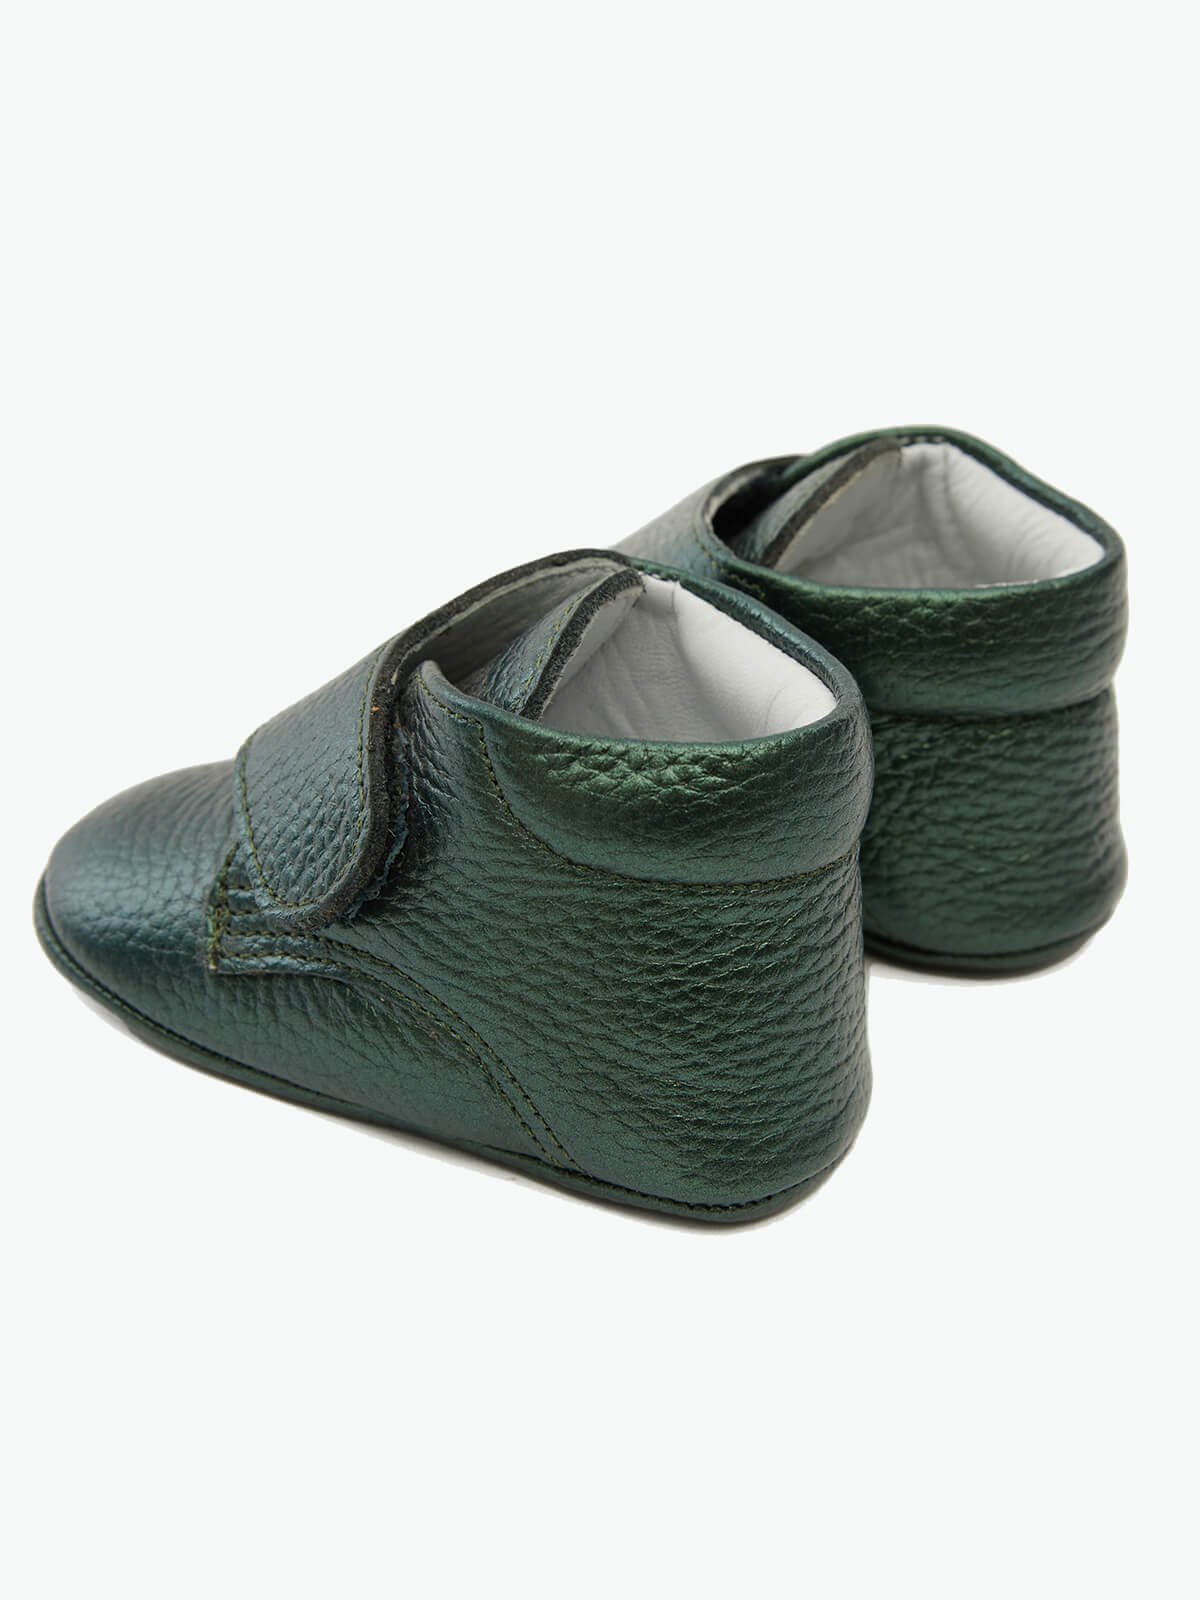 Genuine Leather Velcro Baby Boots Green